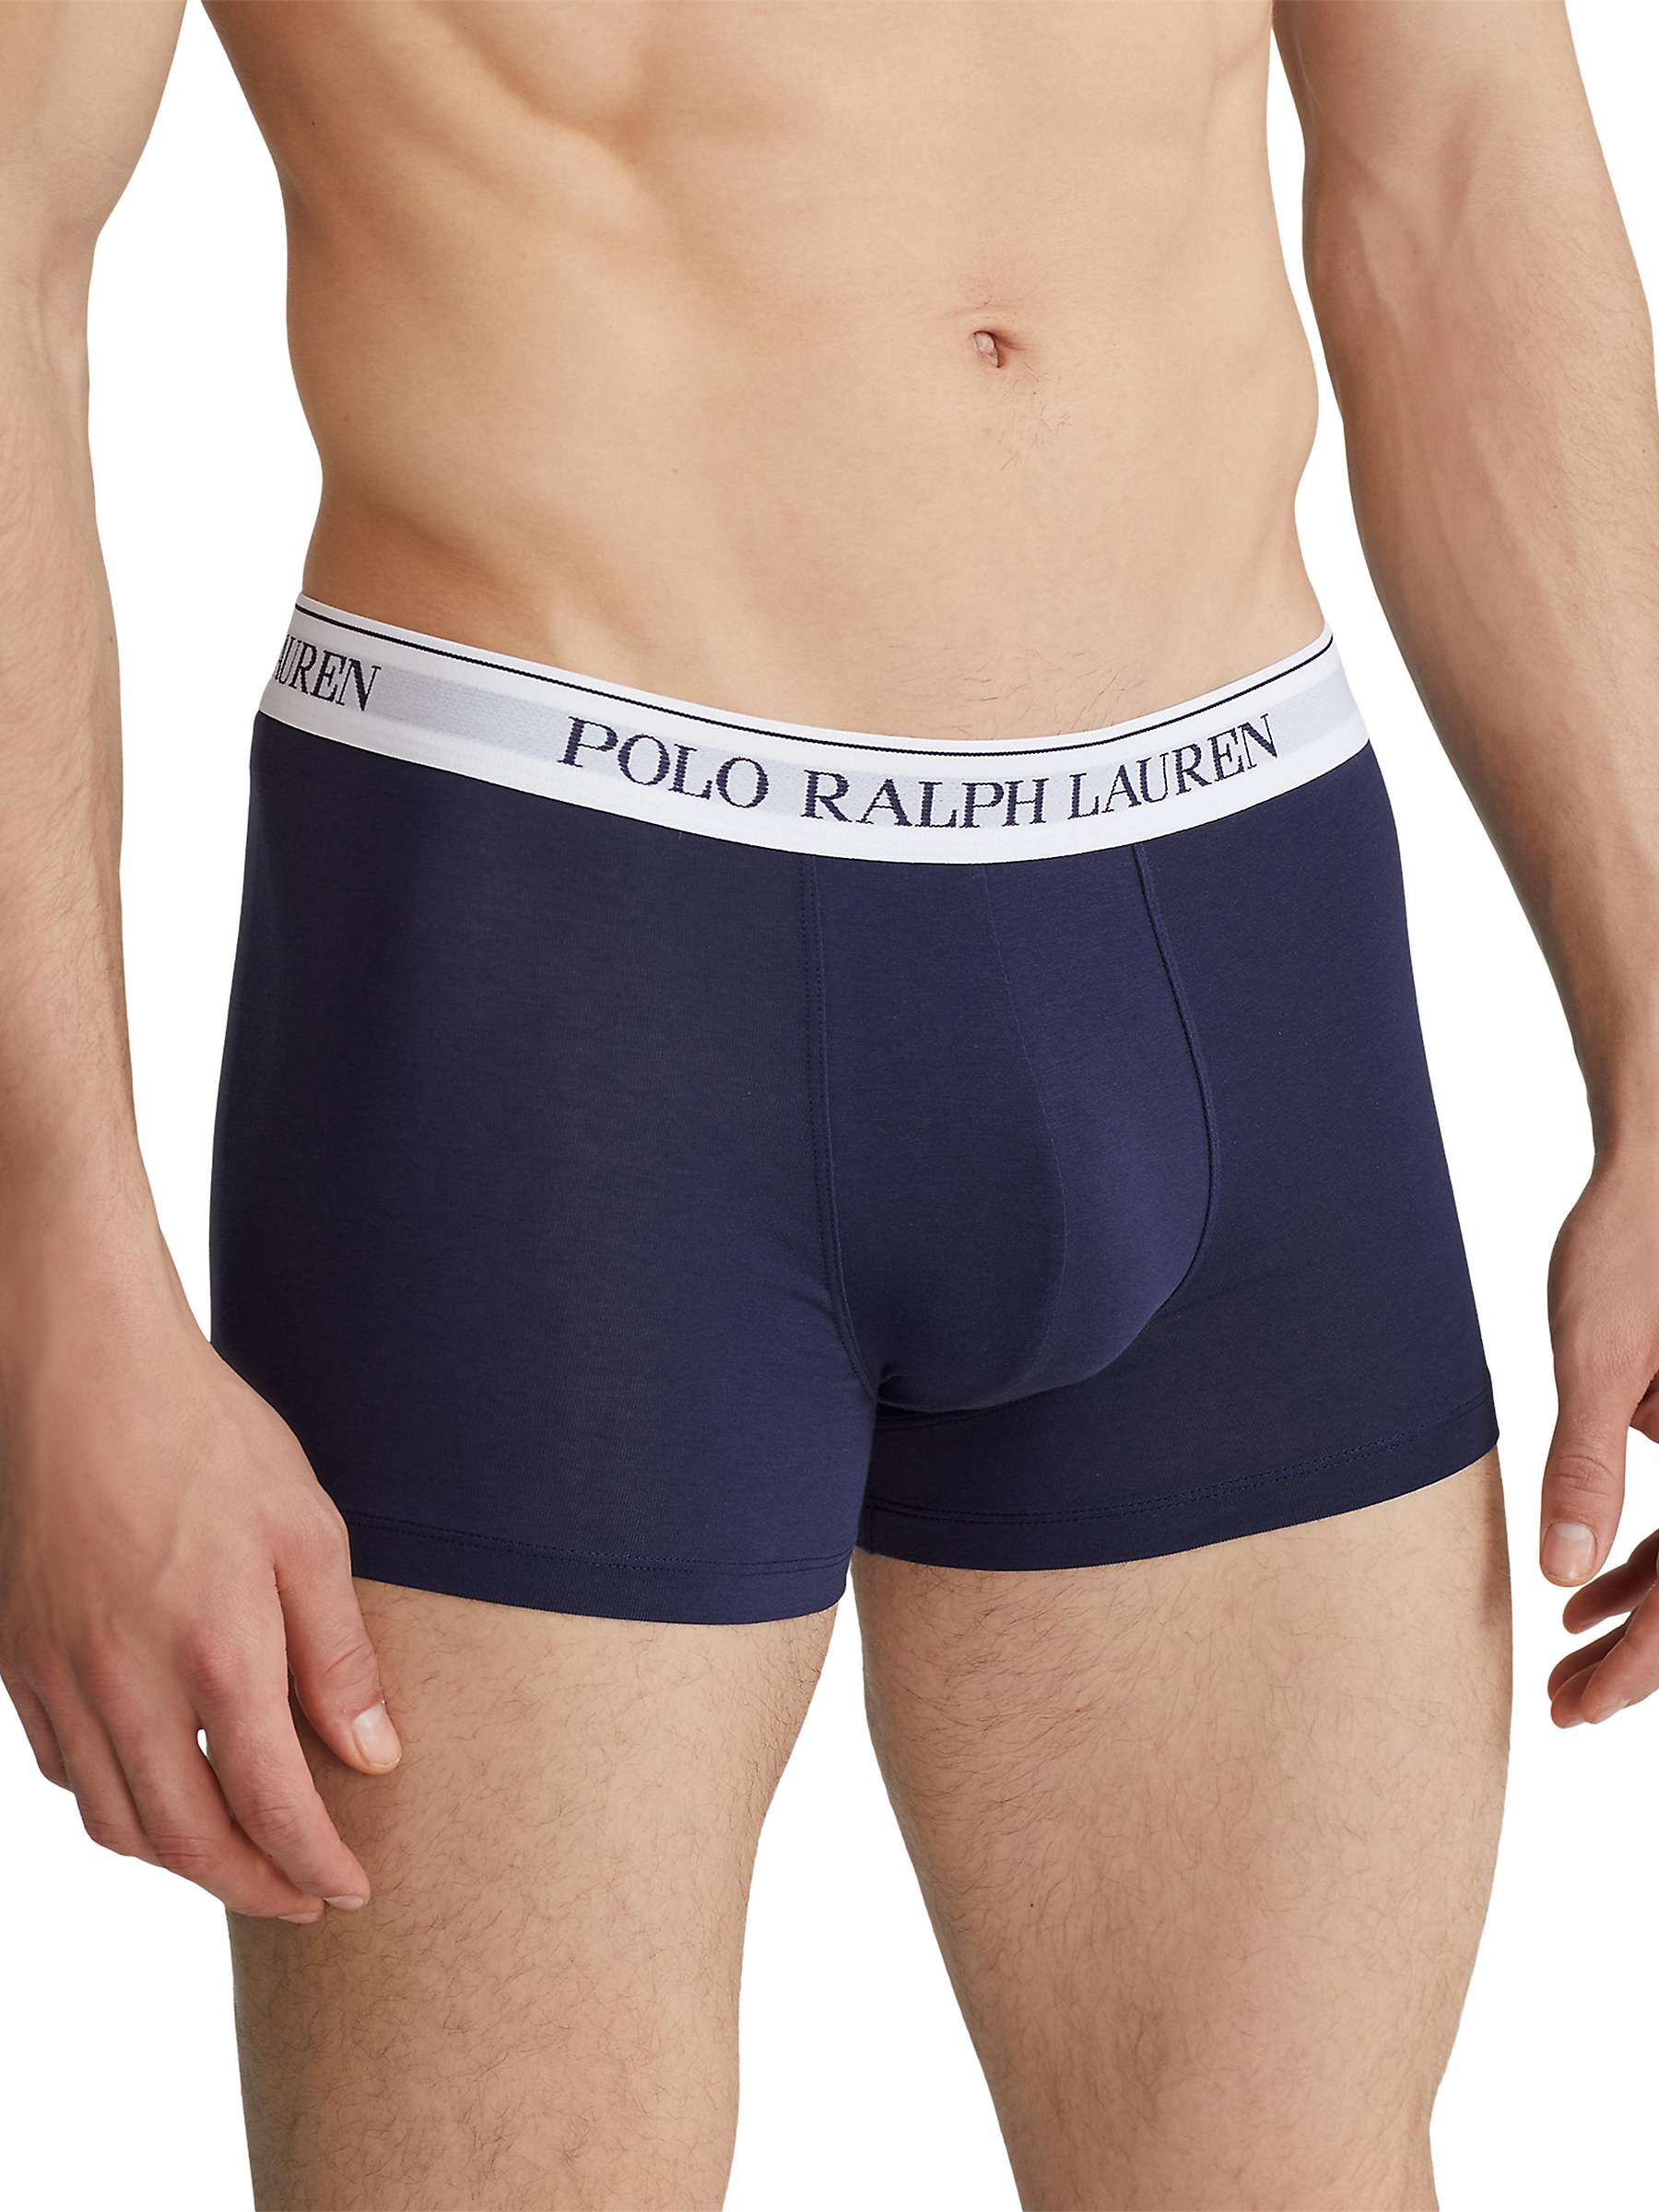 Buy Polo Ralph Lauren Stretch Cotton Trunks, Pack of 3 Online at johnlewis.com